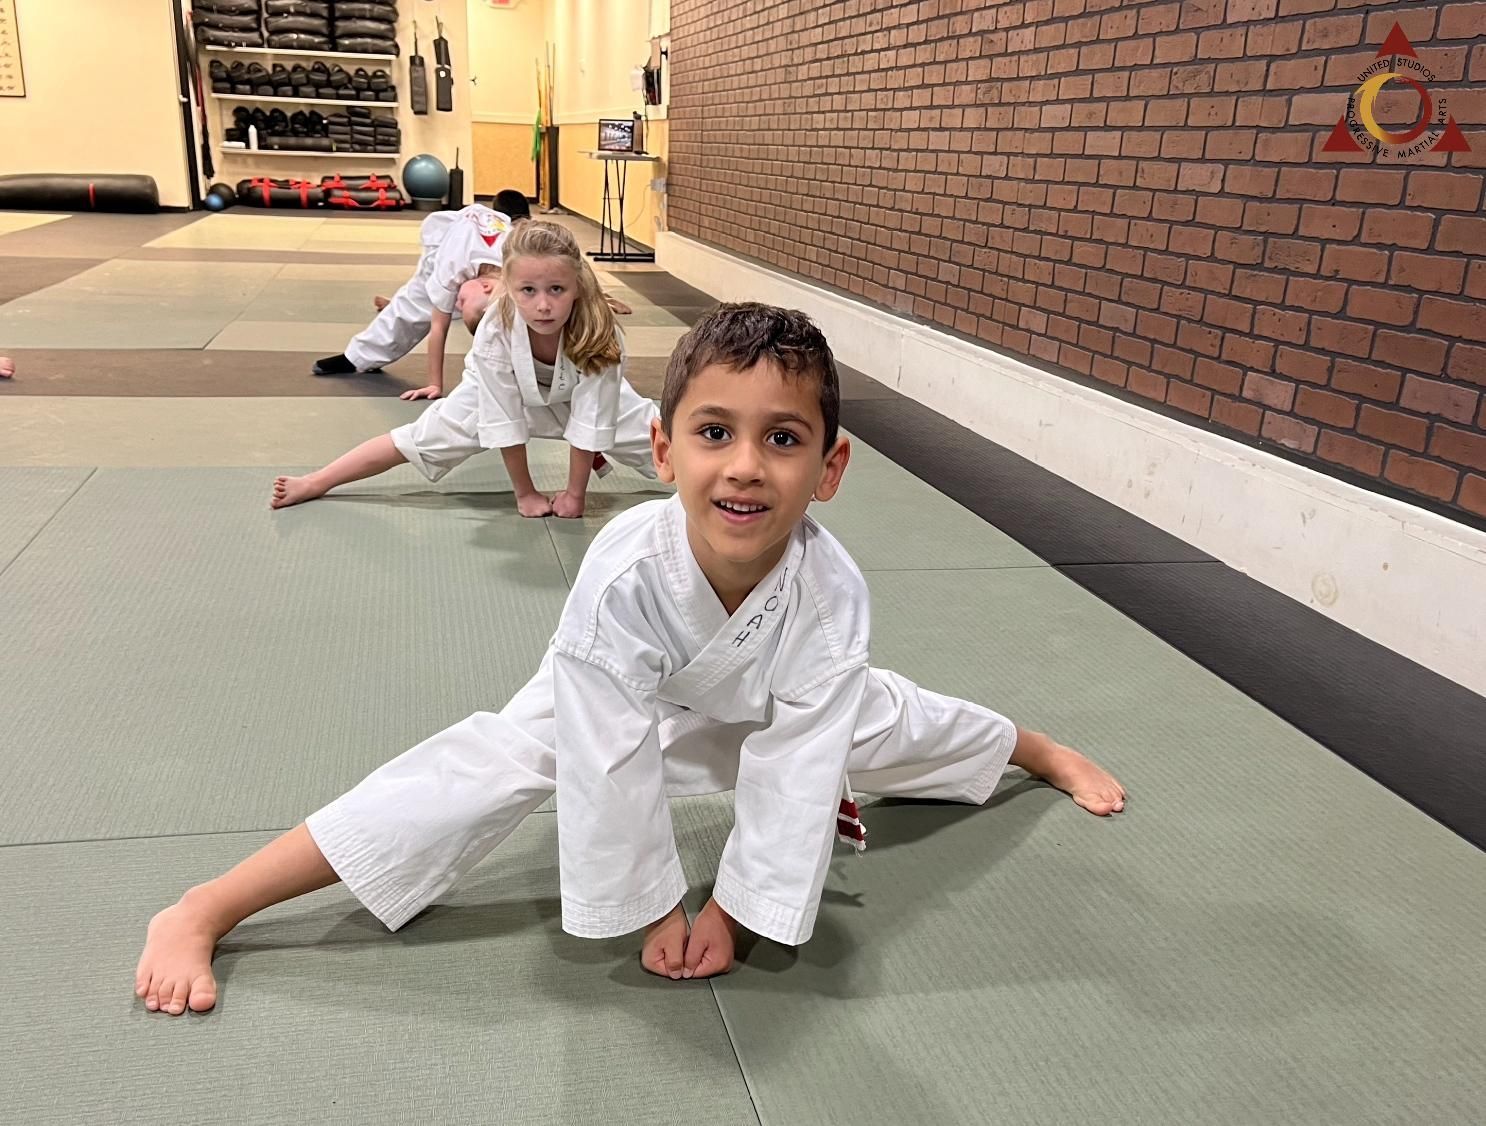 A boy and a girl are doing stretching exercises on a mat in a gym.